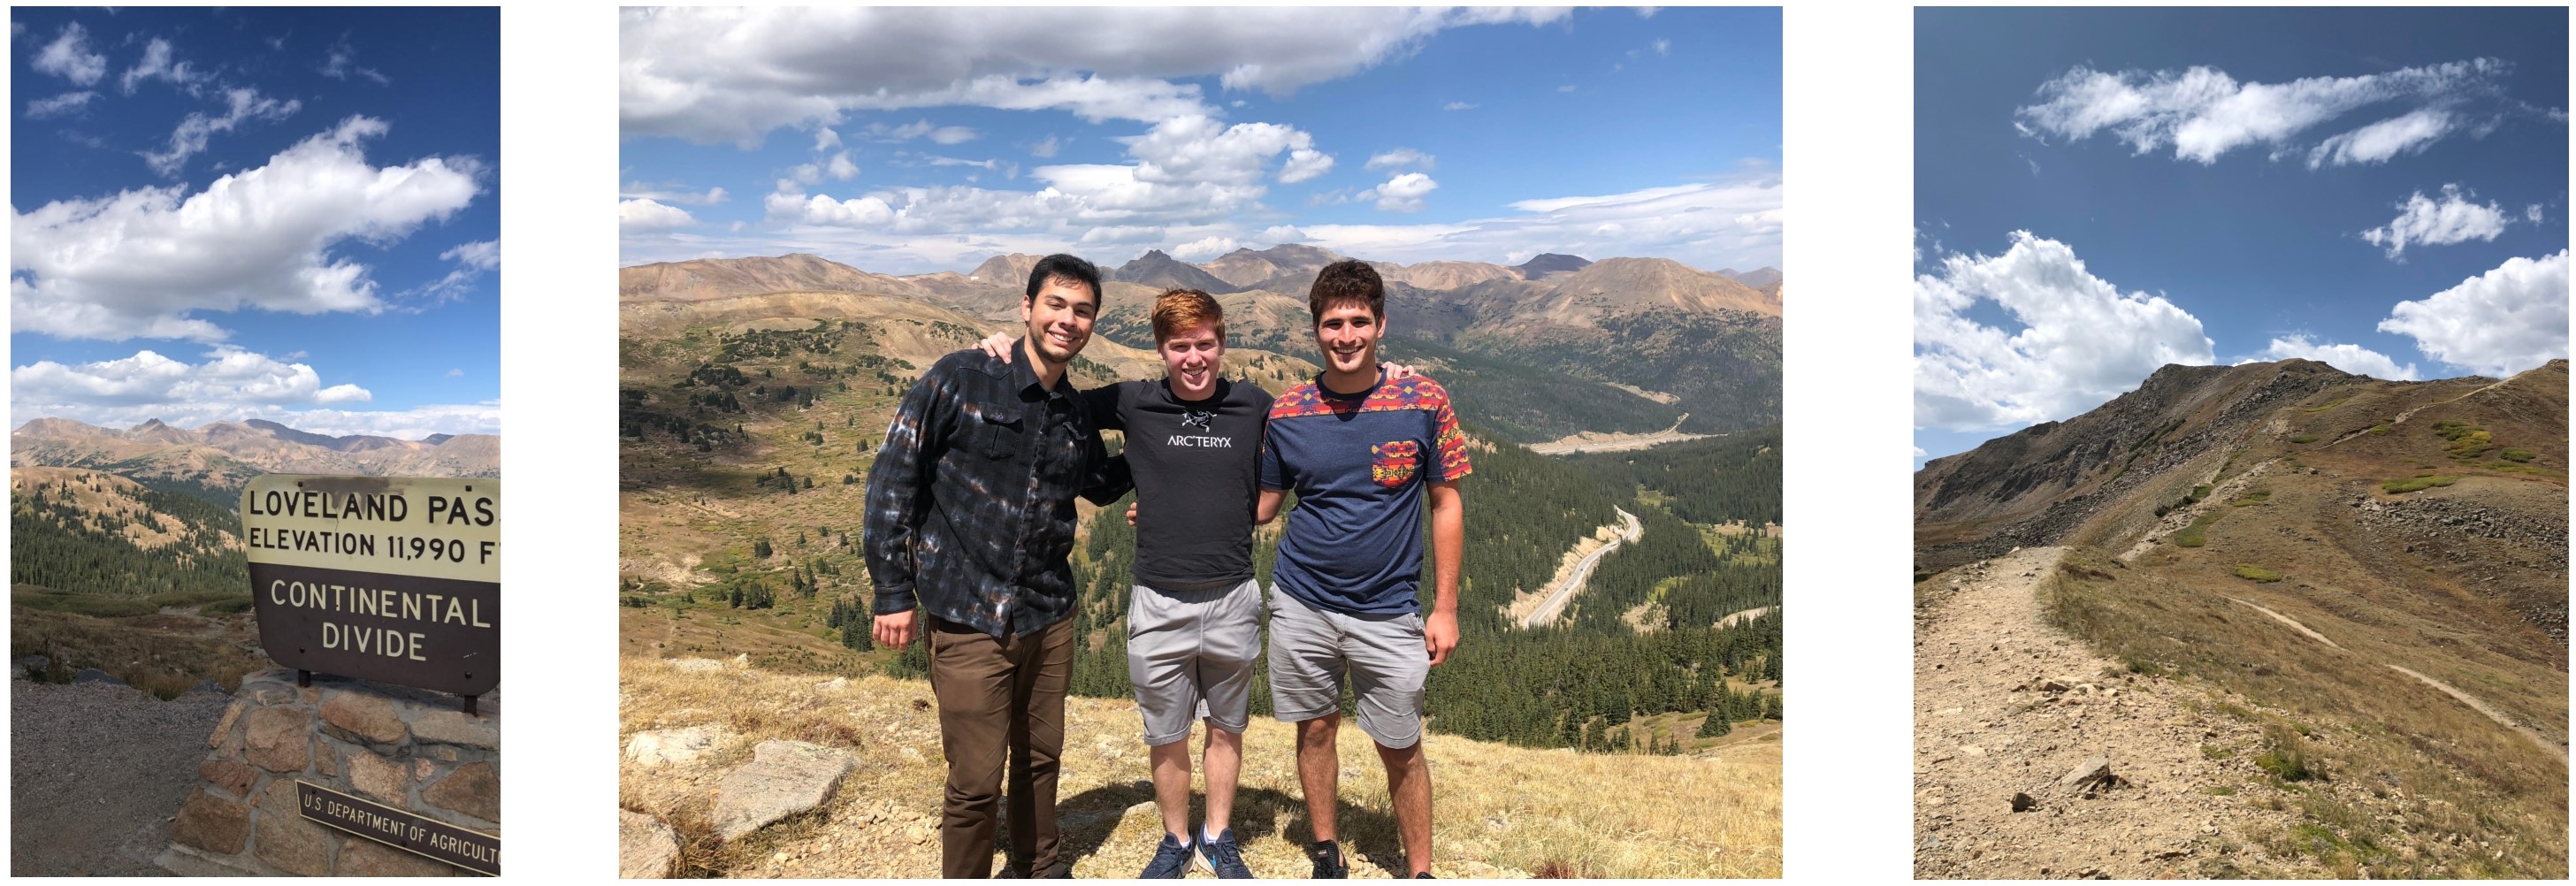 The left picture is a scenic shot with a sign reading "Loveland Pass. Elevation 11,990FT. Continental Divide." The middle photo is a picture of Jack, Seth, and Abtin in front of Loveland Pass. The right photo is another photo of the nature with a blue sky and clouds.